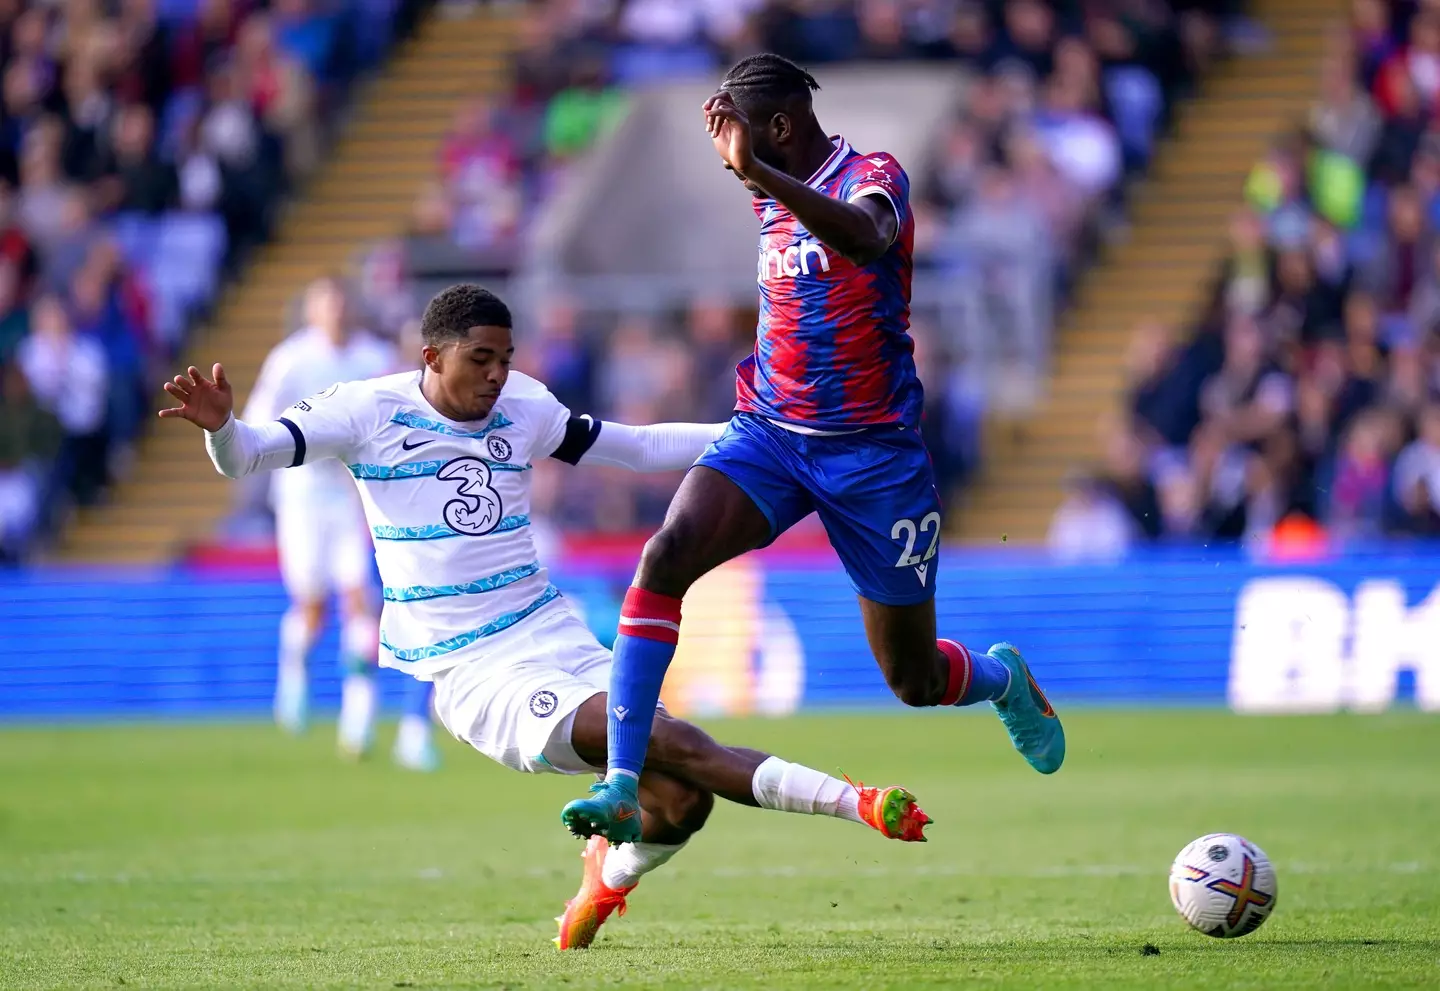 Chelsea's Wesley Fofana (left) and Crystal Palace's Odsonne Edouard battle for the ball during the Premier League match at Selhurst Park, London.